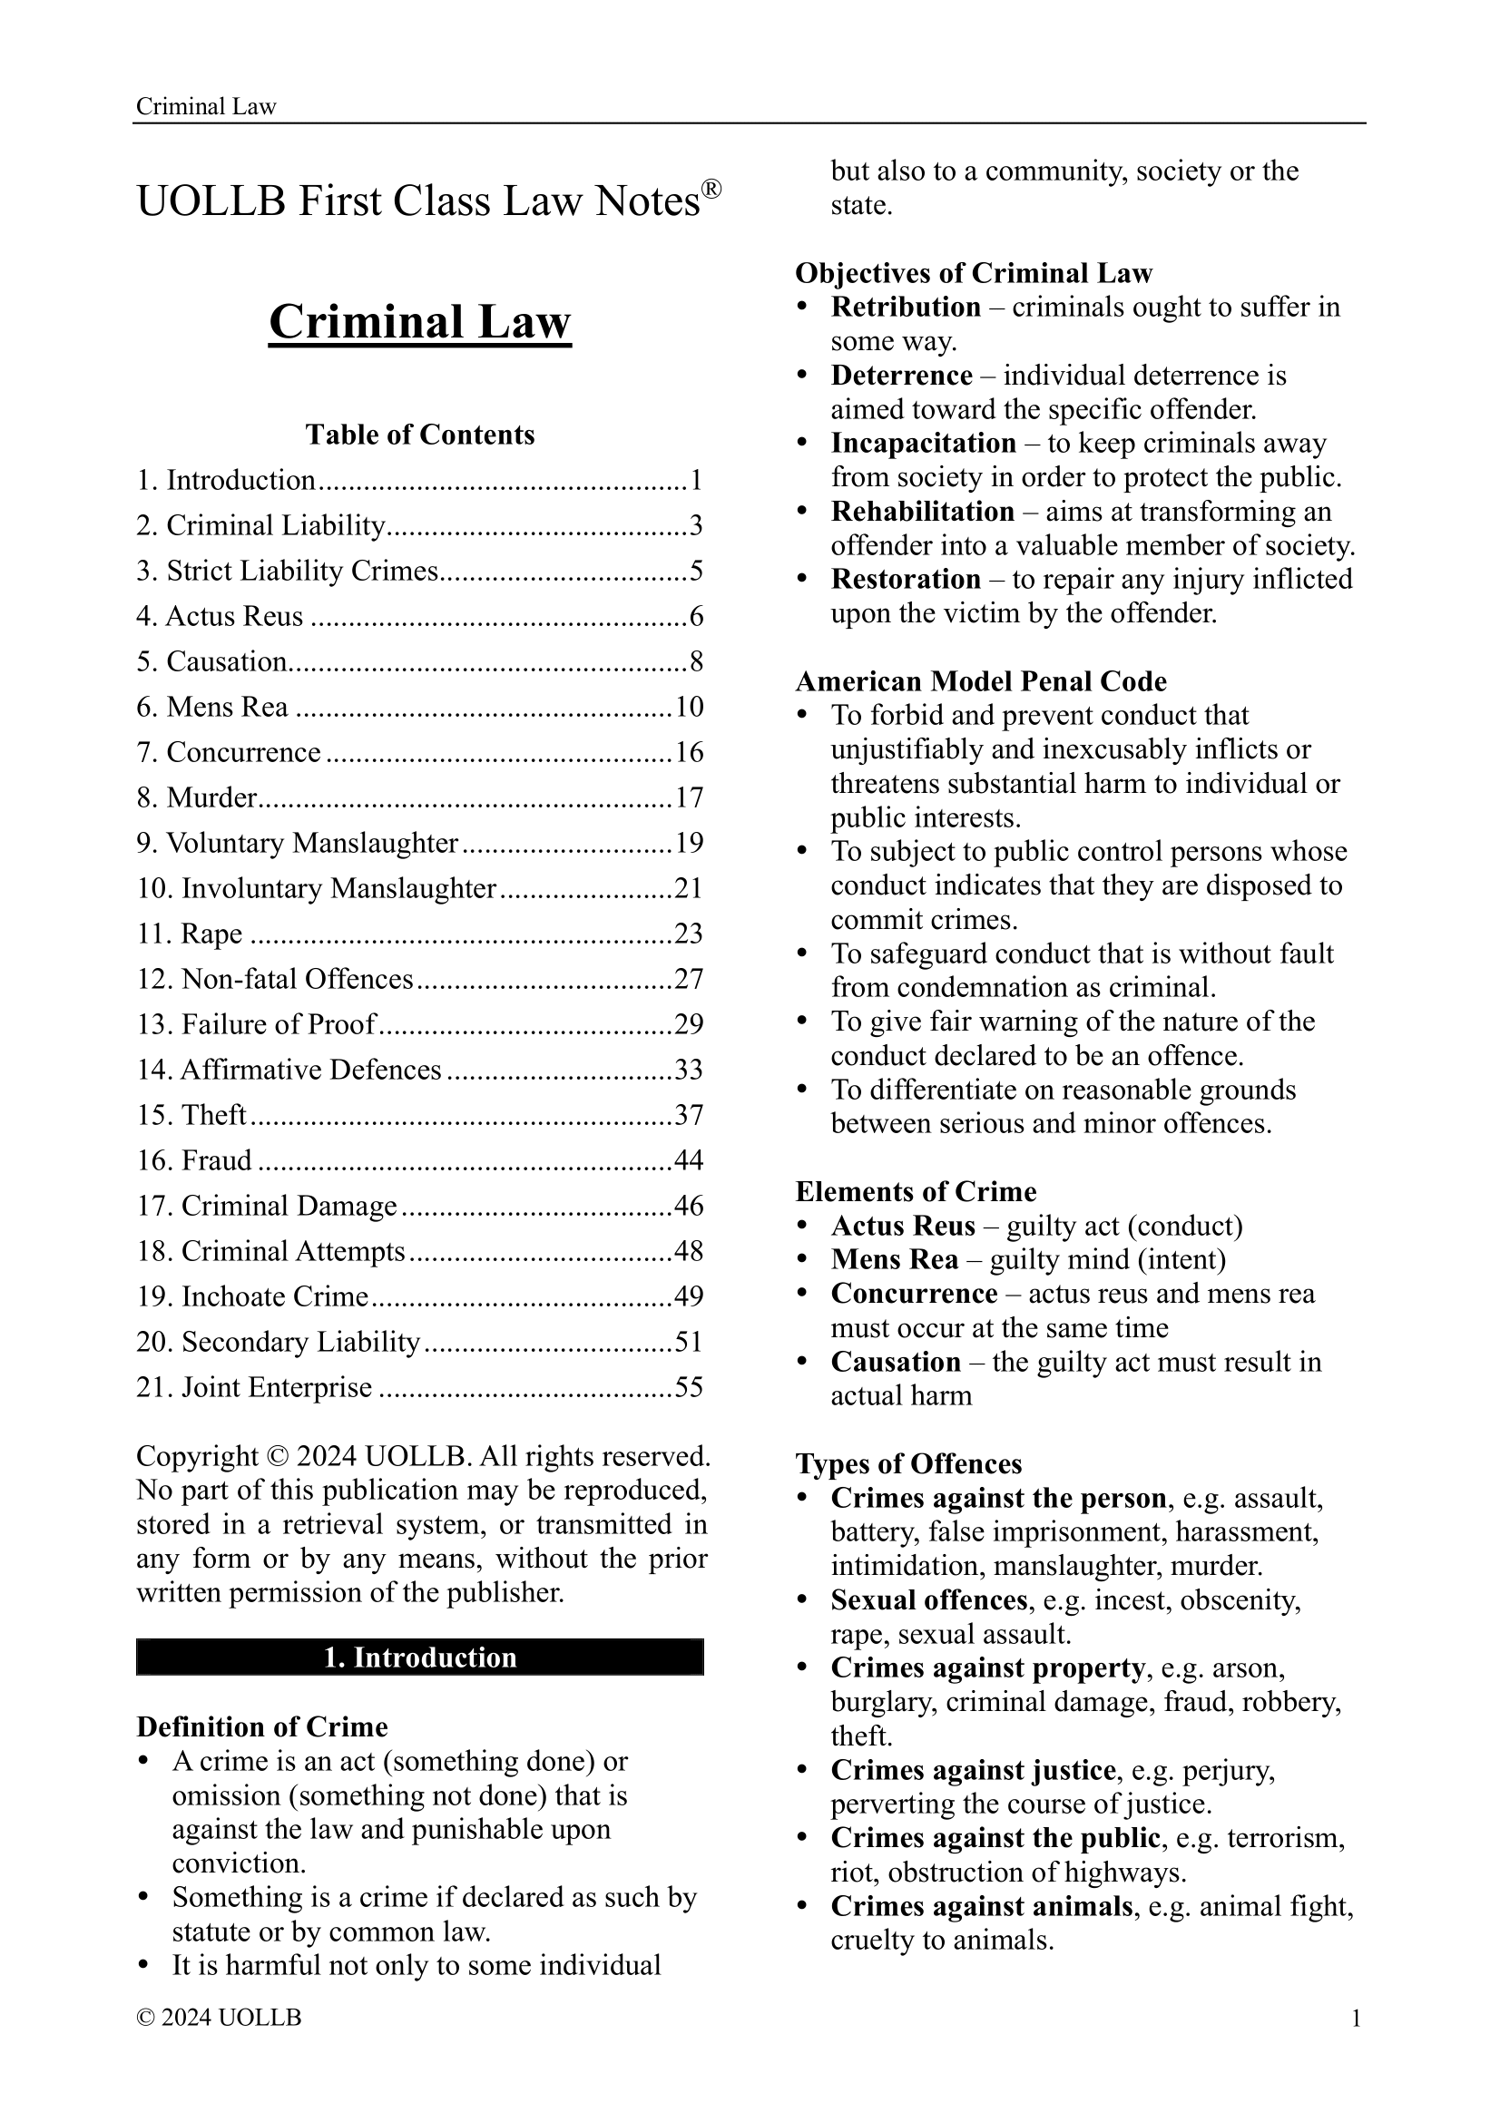 UOLLB First Class Law Notes